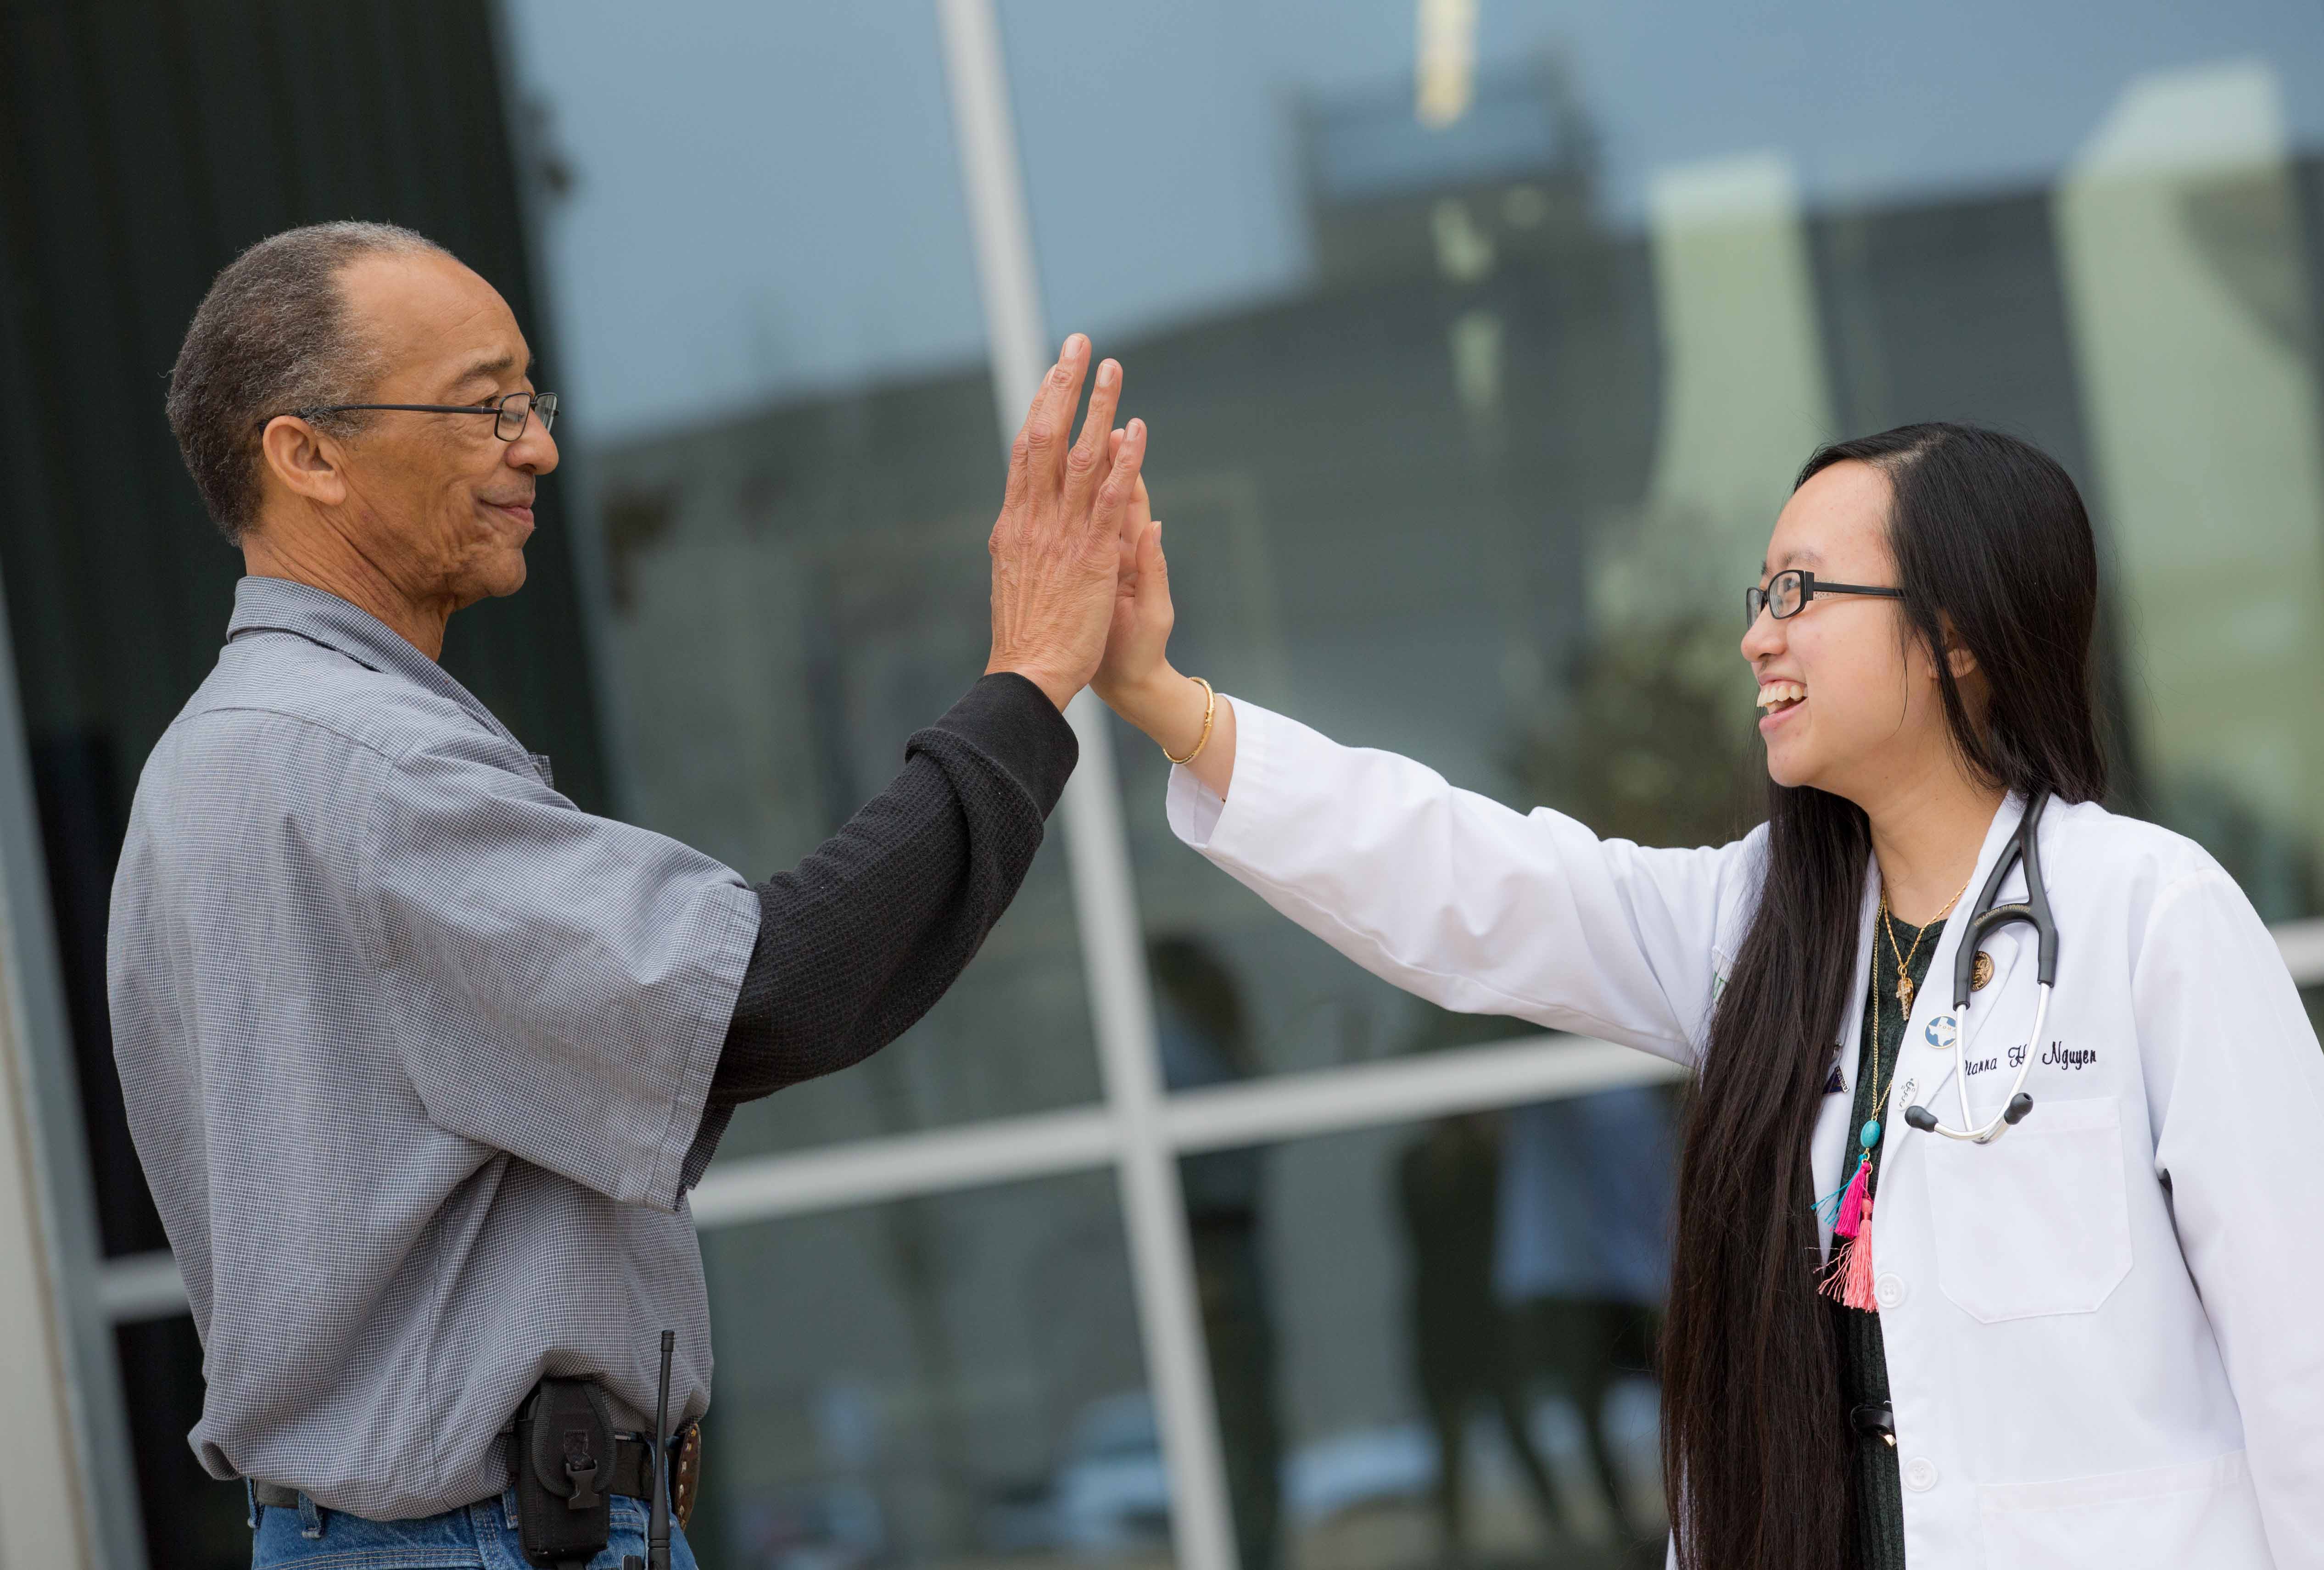 Tcom Student Dianna Nguyen And Employee Larry Clark High Five.